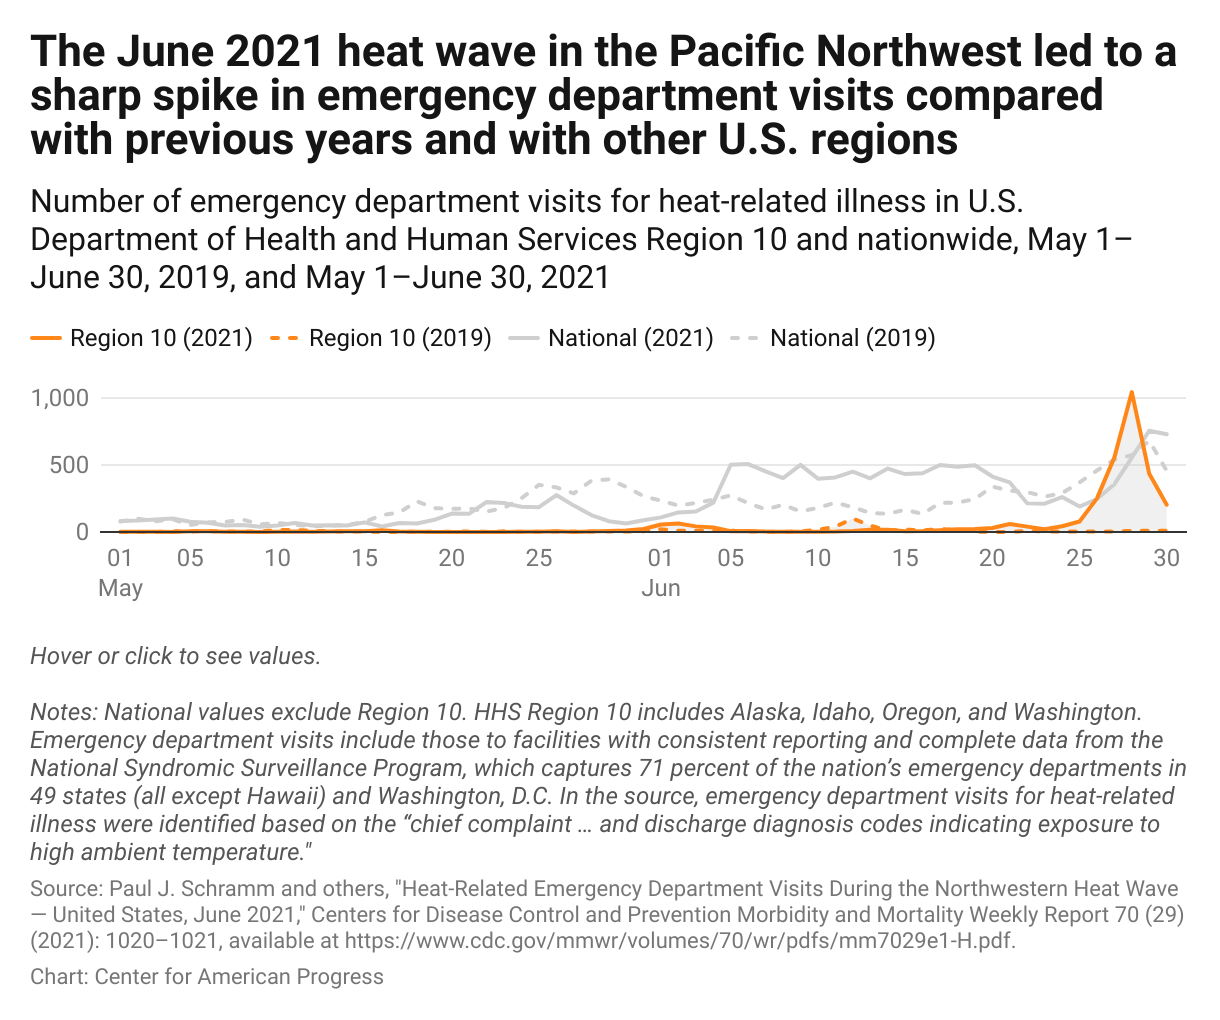 Line graph showing the number of emergency department visits in the Pacific Northwest (Alaska, Idaho, Oregon, and Washington) compared with the rest of the country in summer 2019 and summer 2021. 